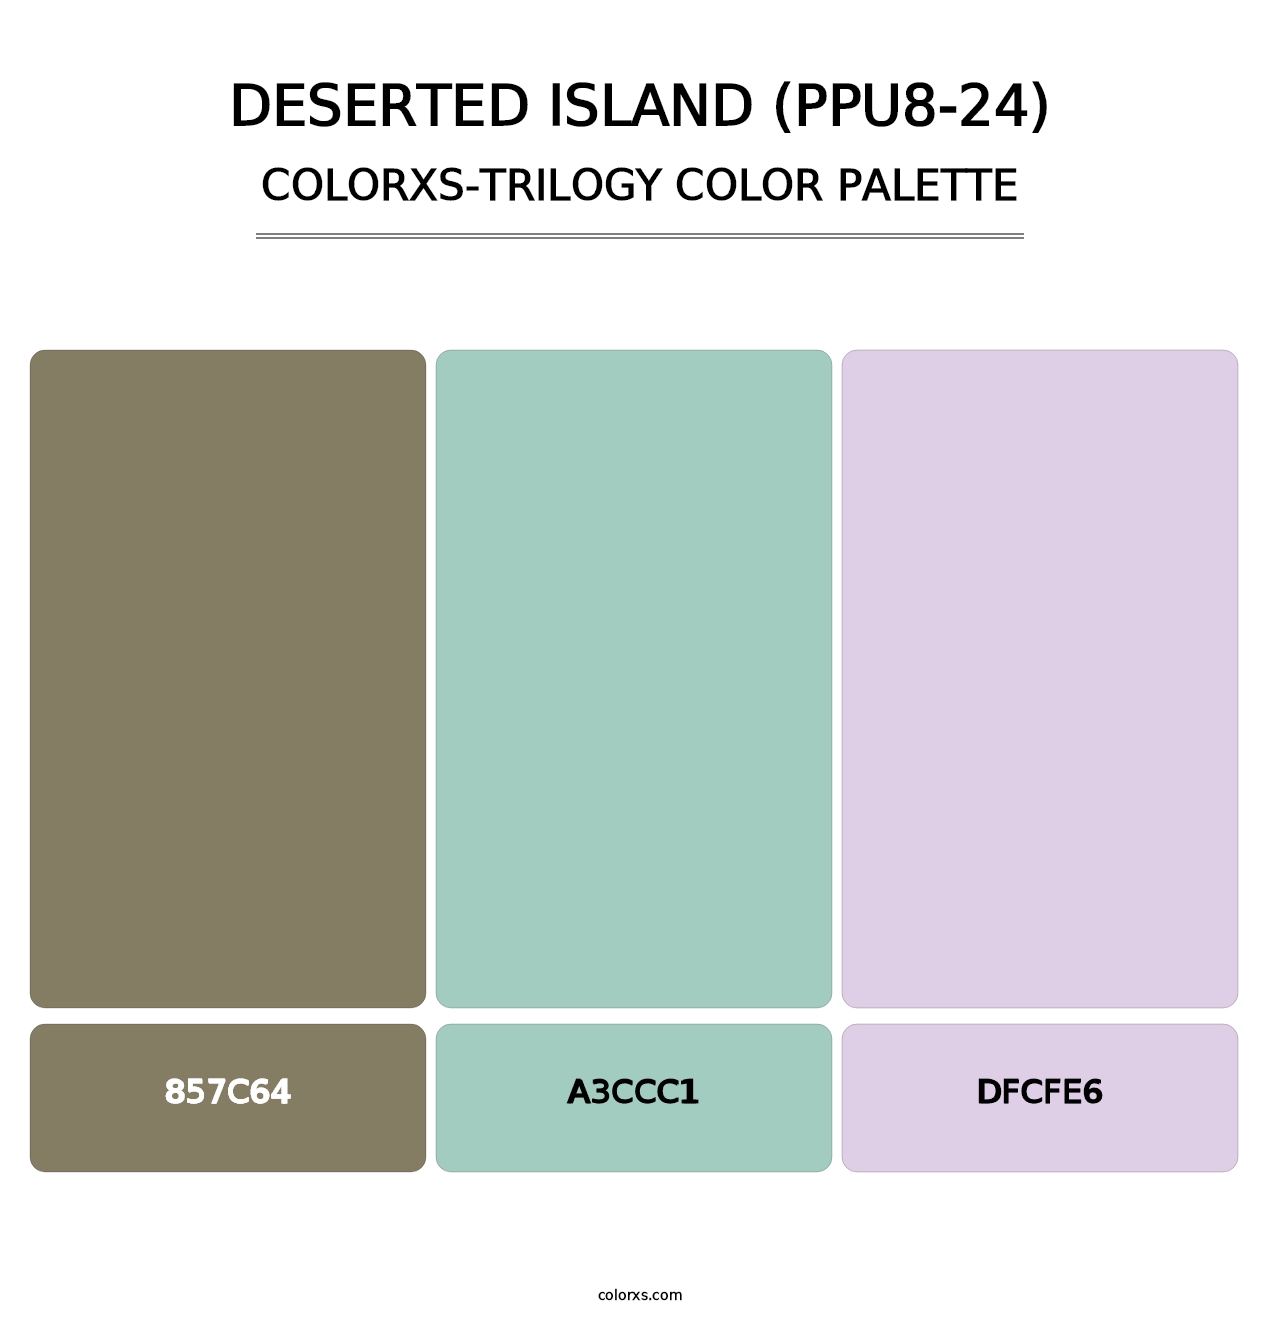 Deserted Island (PPU8-24) - Colorxs Trilogy Palette